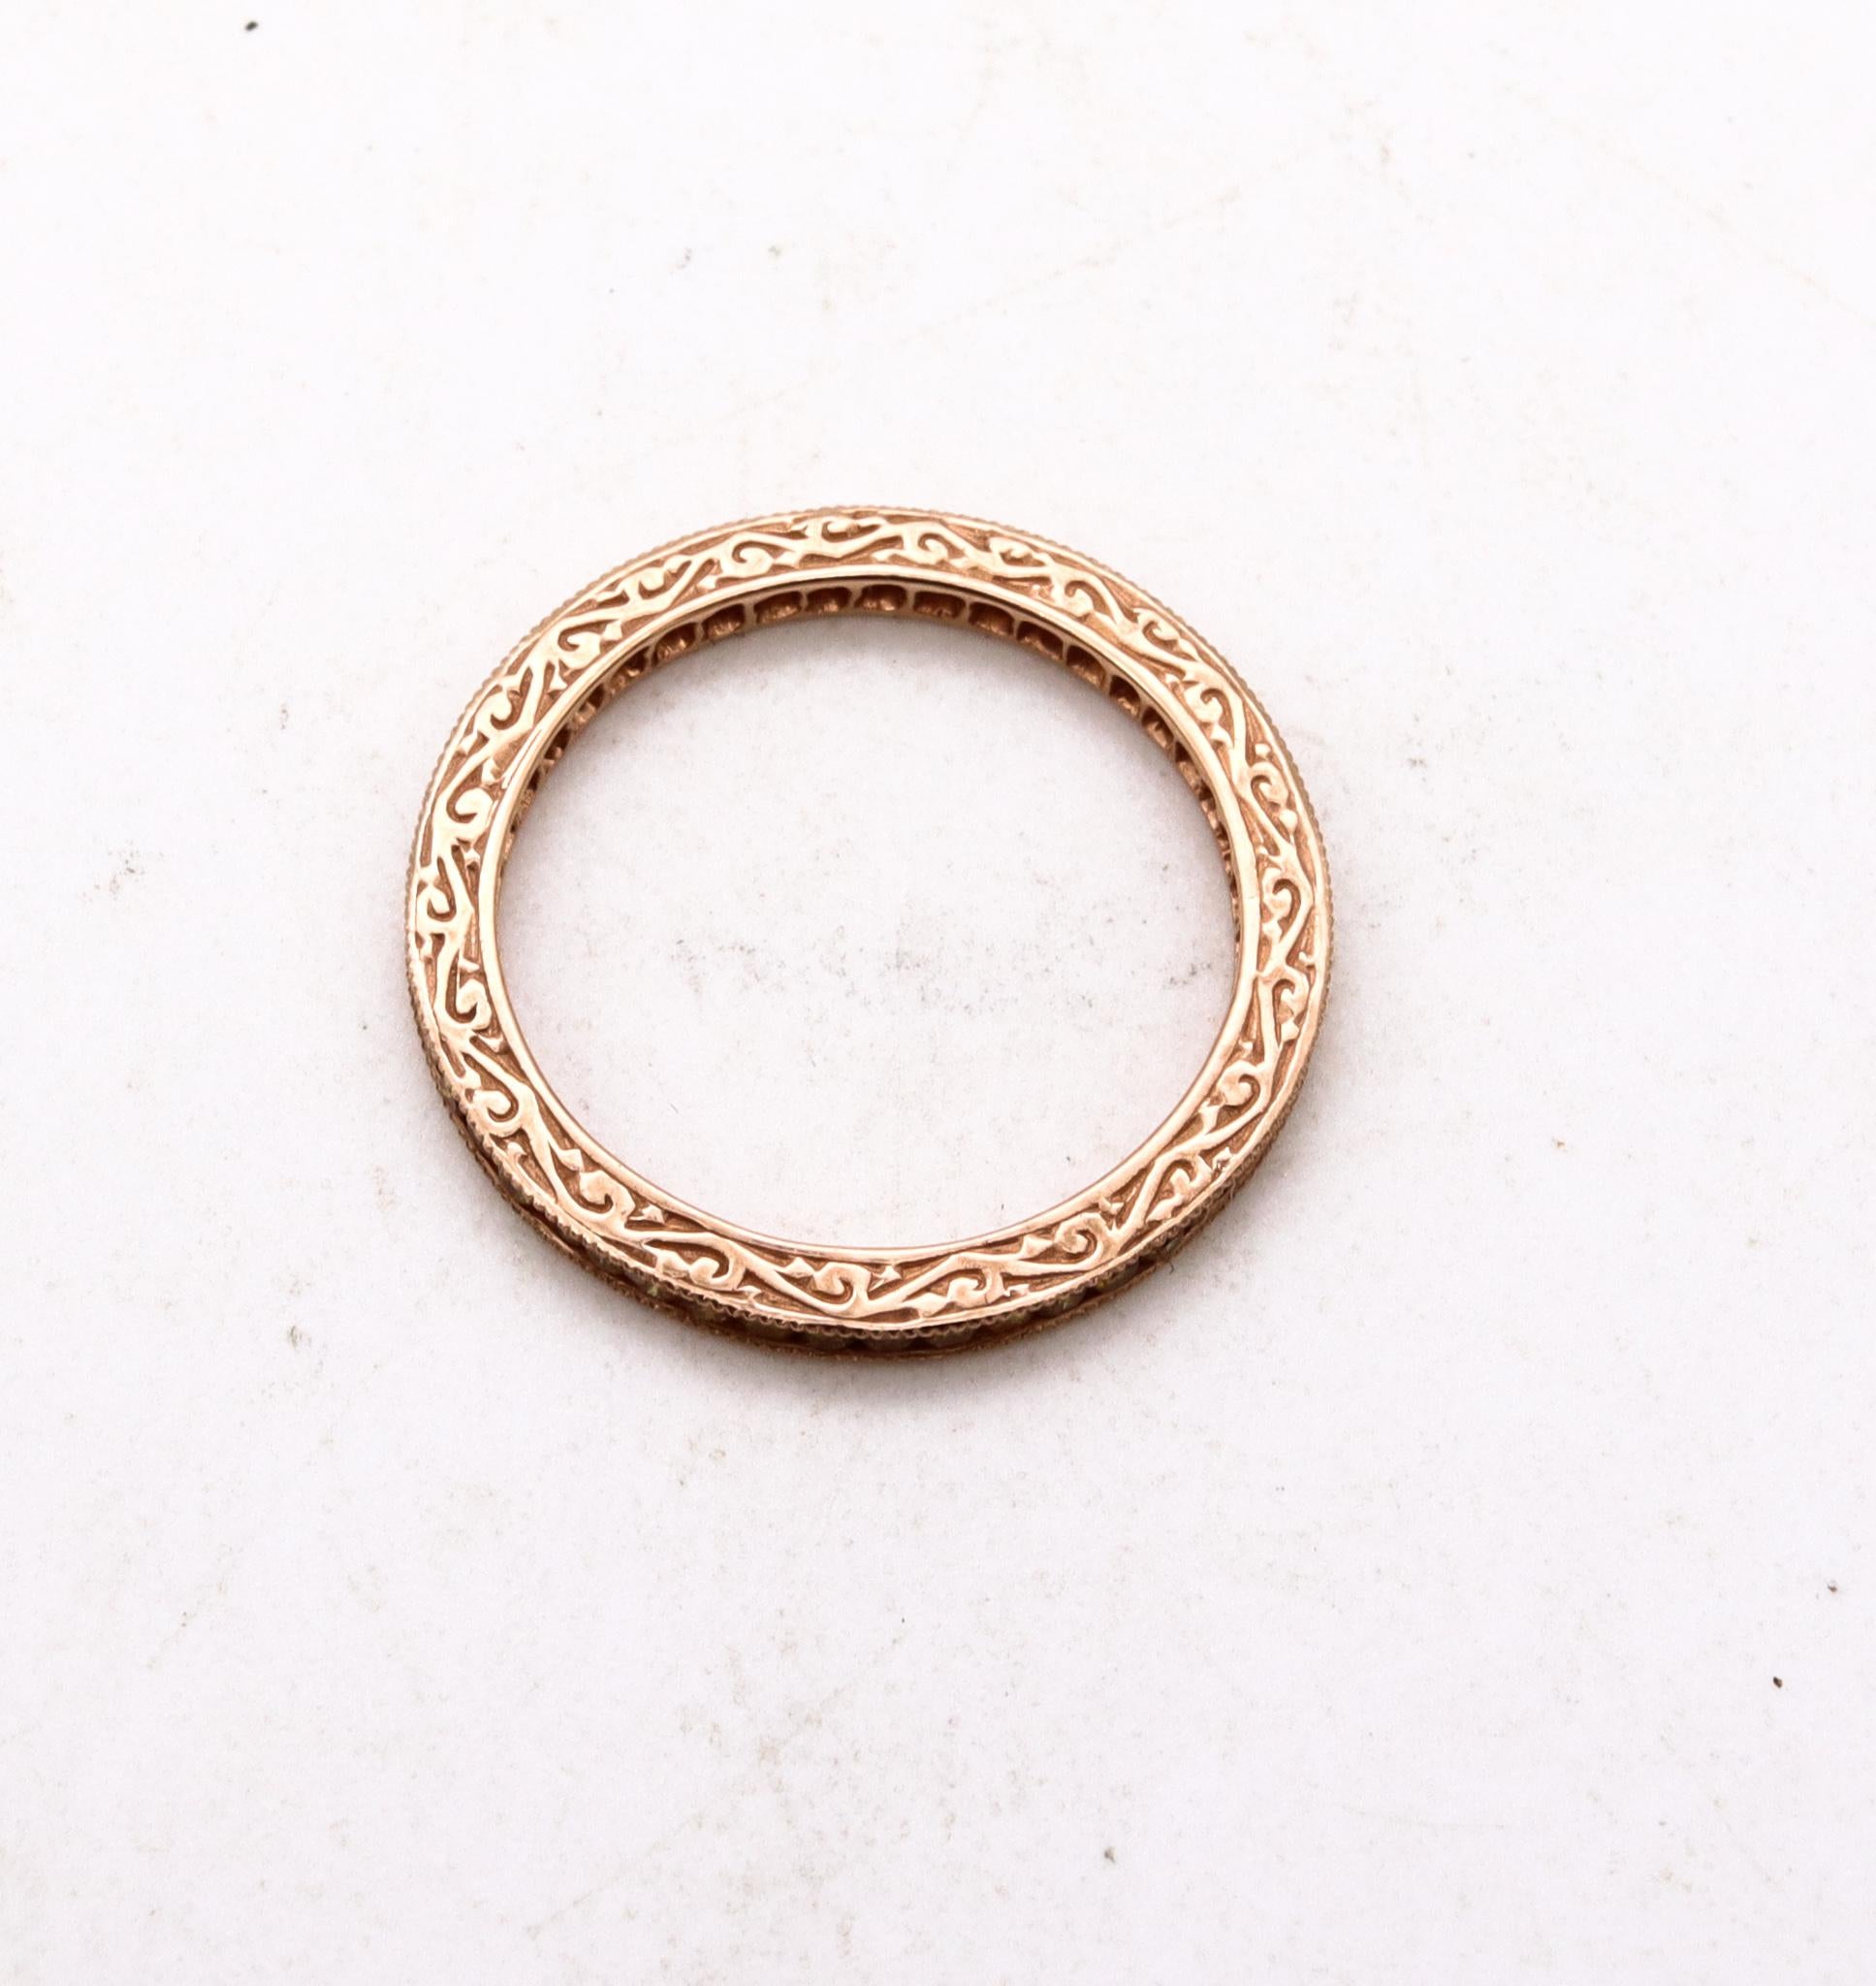 An eternity ring band with Natural Yellow Diamonds.

Modern eternity ring band, crafted in America in solid pink rose gold. Both lateral borders are highly decorated, with organics motifs and patterns.

Mount in a flat channel settings, with 60